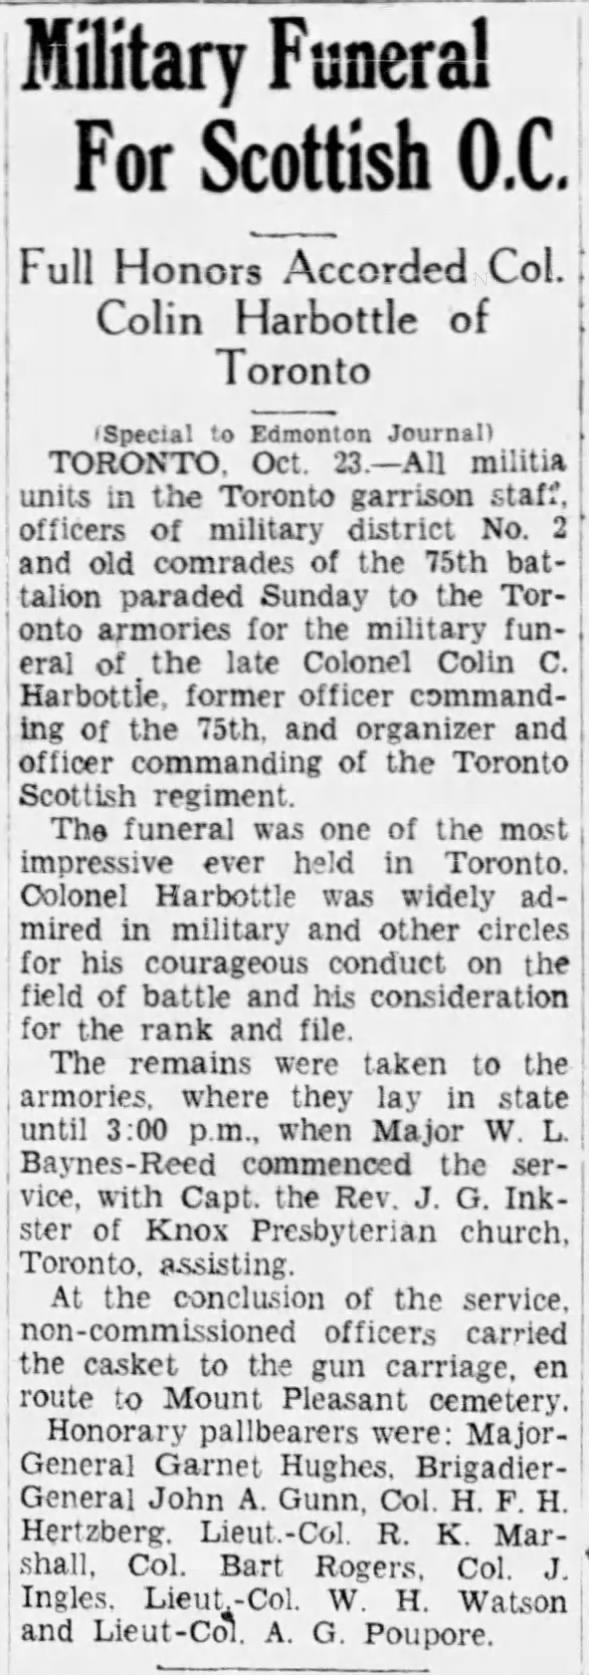 Military Funeral For Scottish O. C.
Colin C. Harbottle